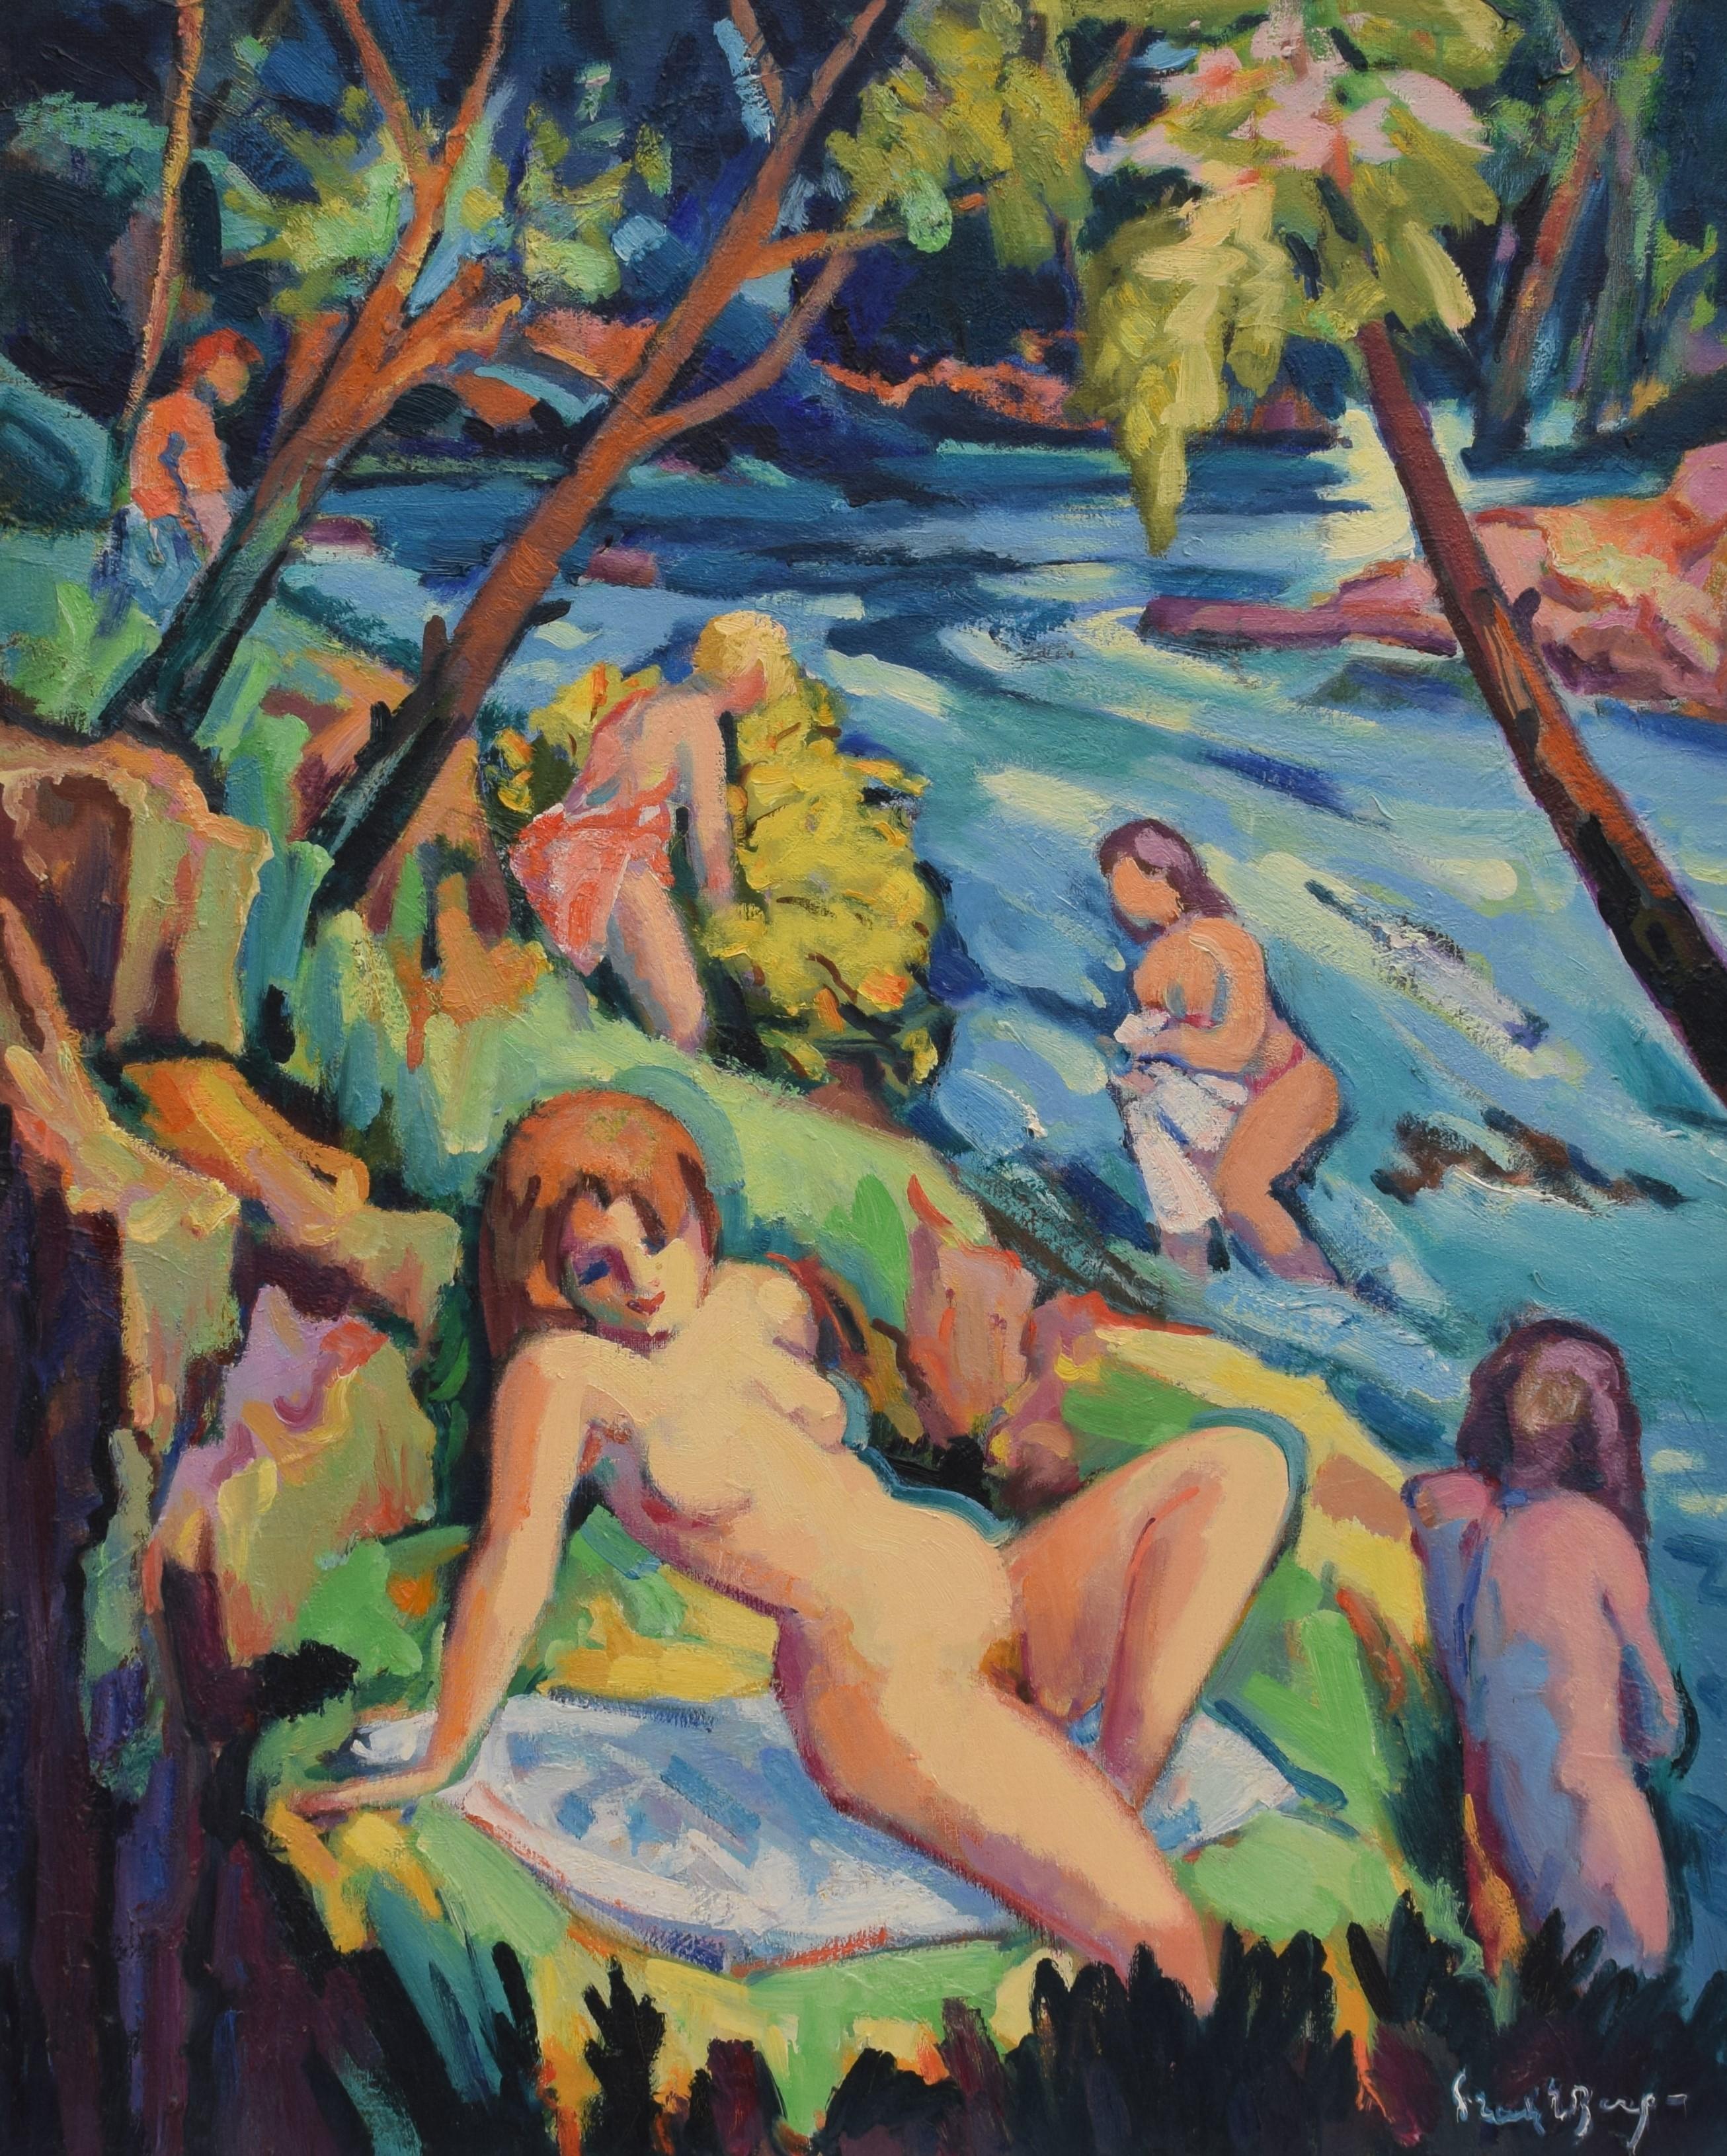 Bathers nearby the river - Oil on canvas Fauvist Dutch Artist Figurative Art - Painting by Freek van den Berg